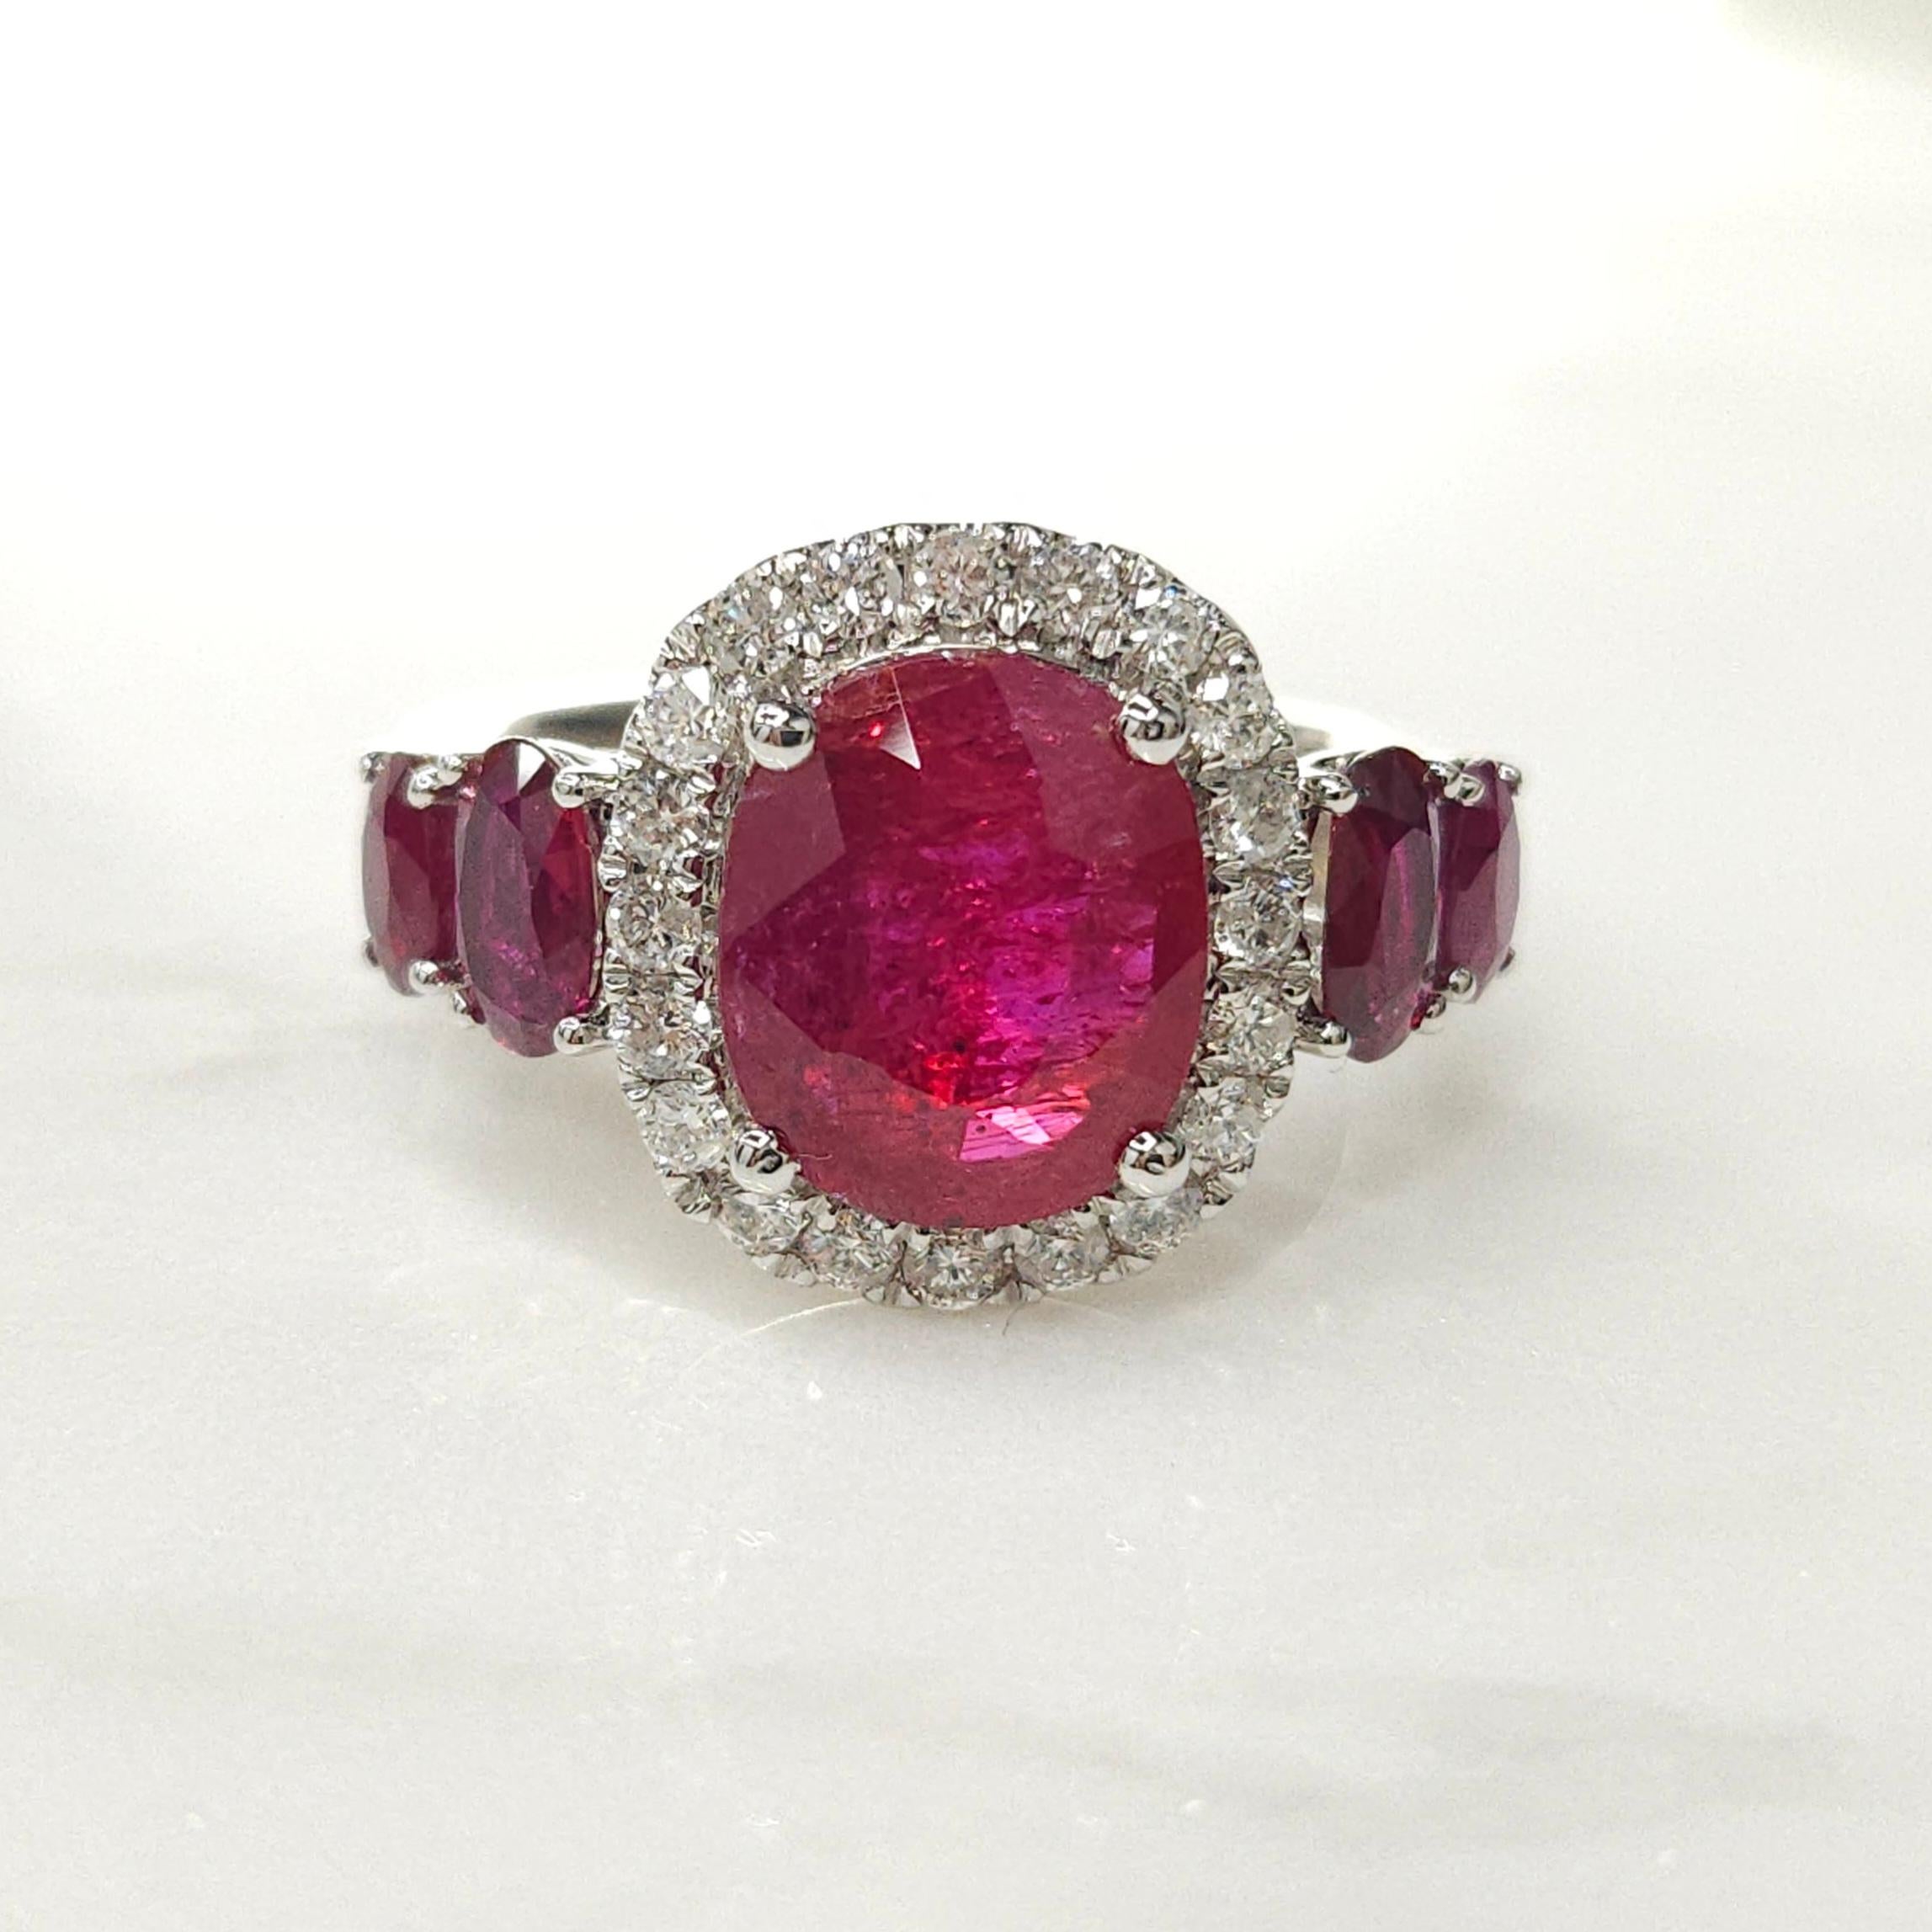 Indulge in the luxurious allure of this captivating halo style ring featuring a dazzling IGI Certified 2.86 Carat ruby in an intense orangy purplish-red hue, meticulously shaped into an elegant oval form that exudes timeless charm and